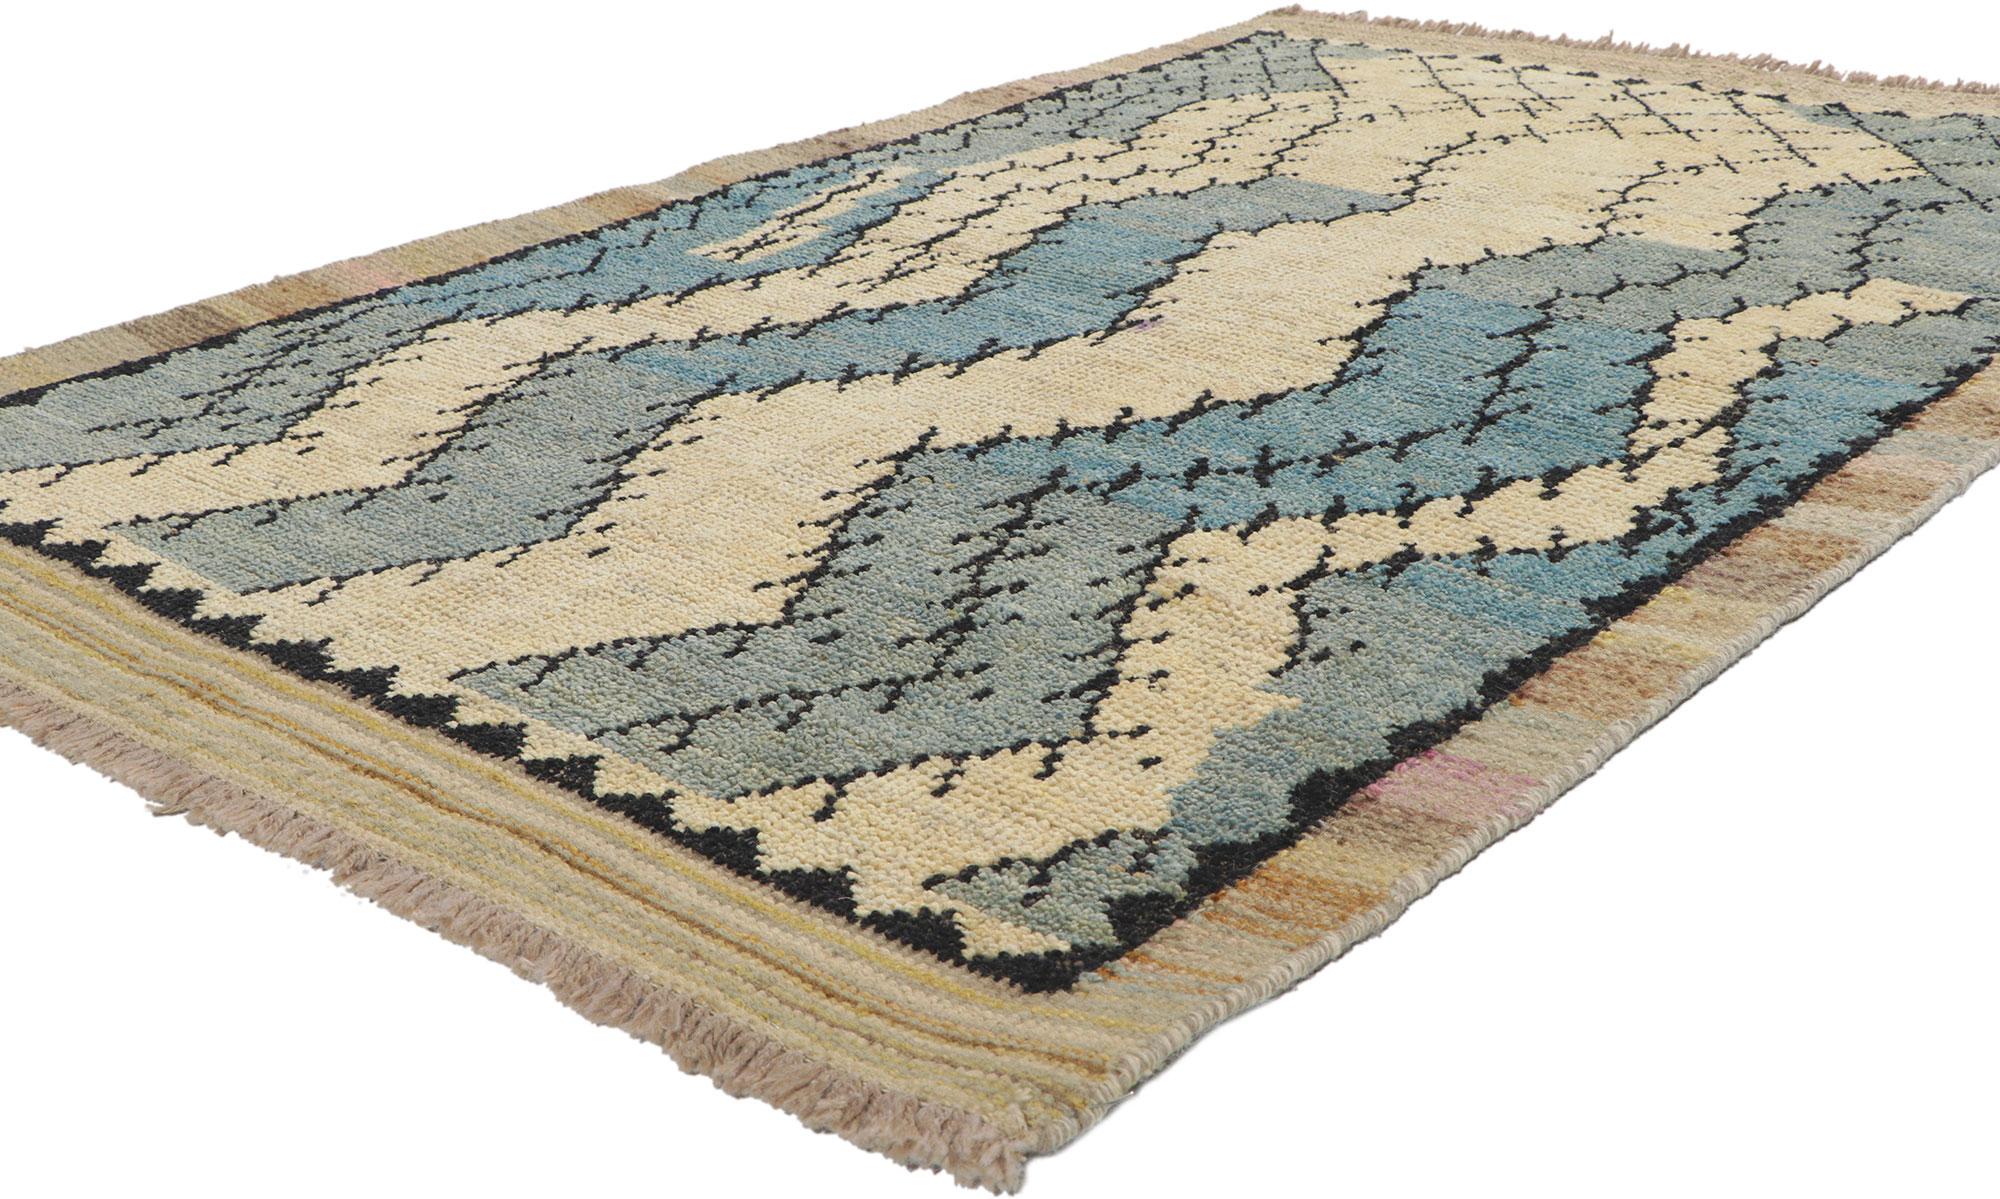 80716 New Contemporary Moroccan textured rug 04'02 x 06'07. Showcasing an expressive design, incredible detail and texture, this hand knotted wool Moroccan rug is a captivating vision of woven beauty. The eye-catching chevron pattern and colors